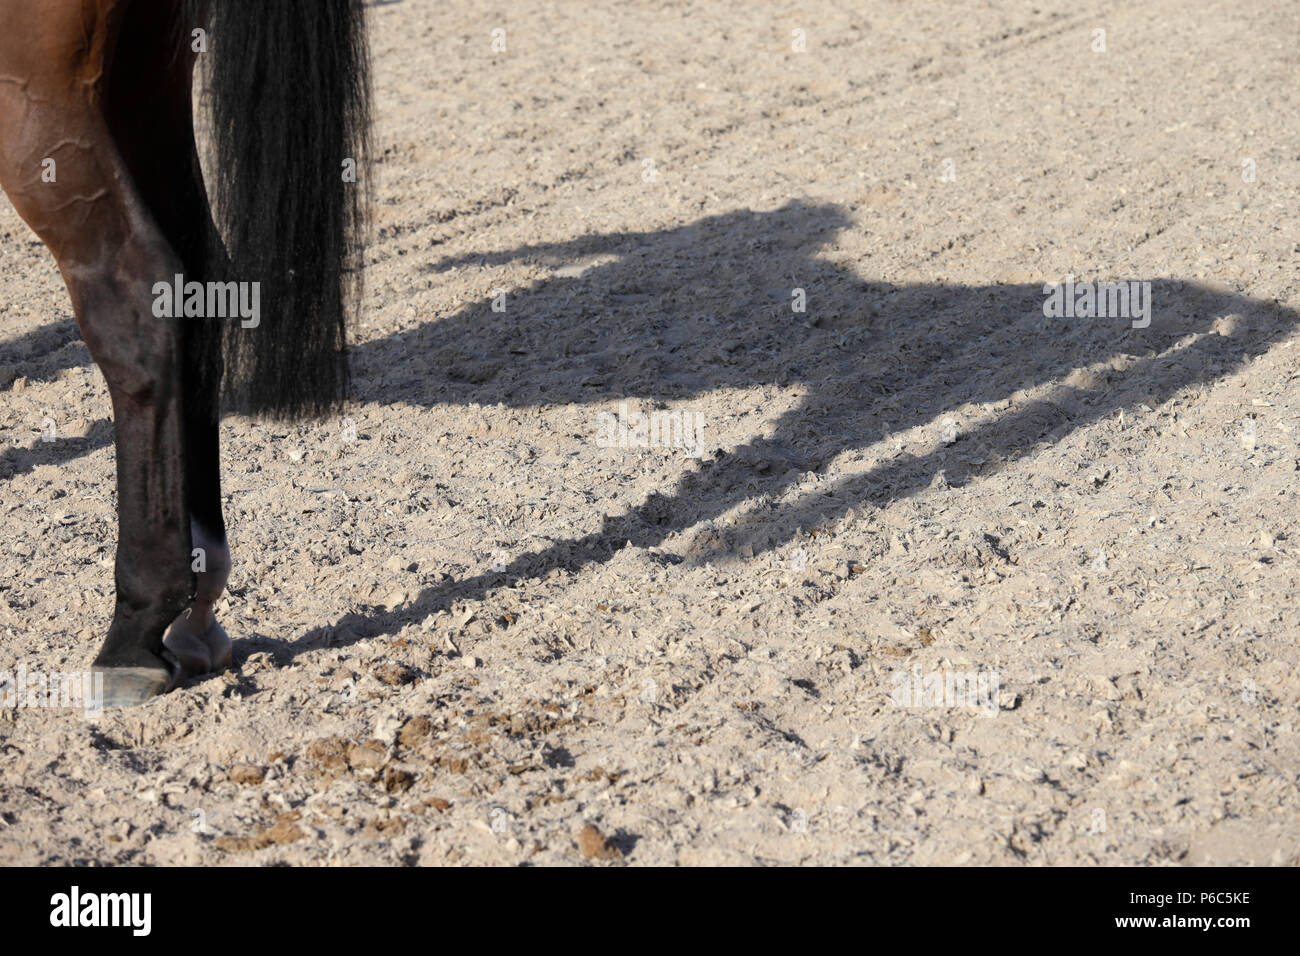 Doha, horse casts a shadow on the ground Stock Photo